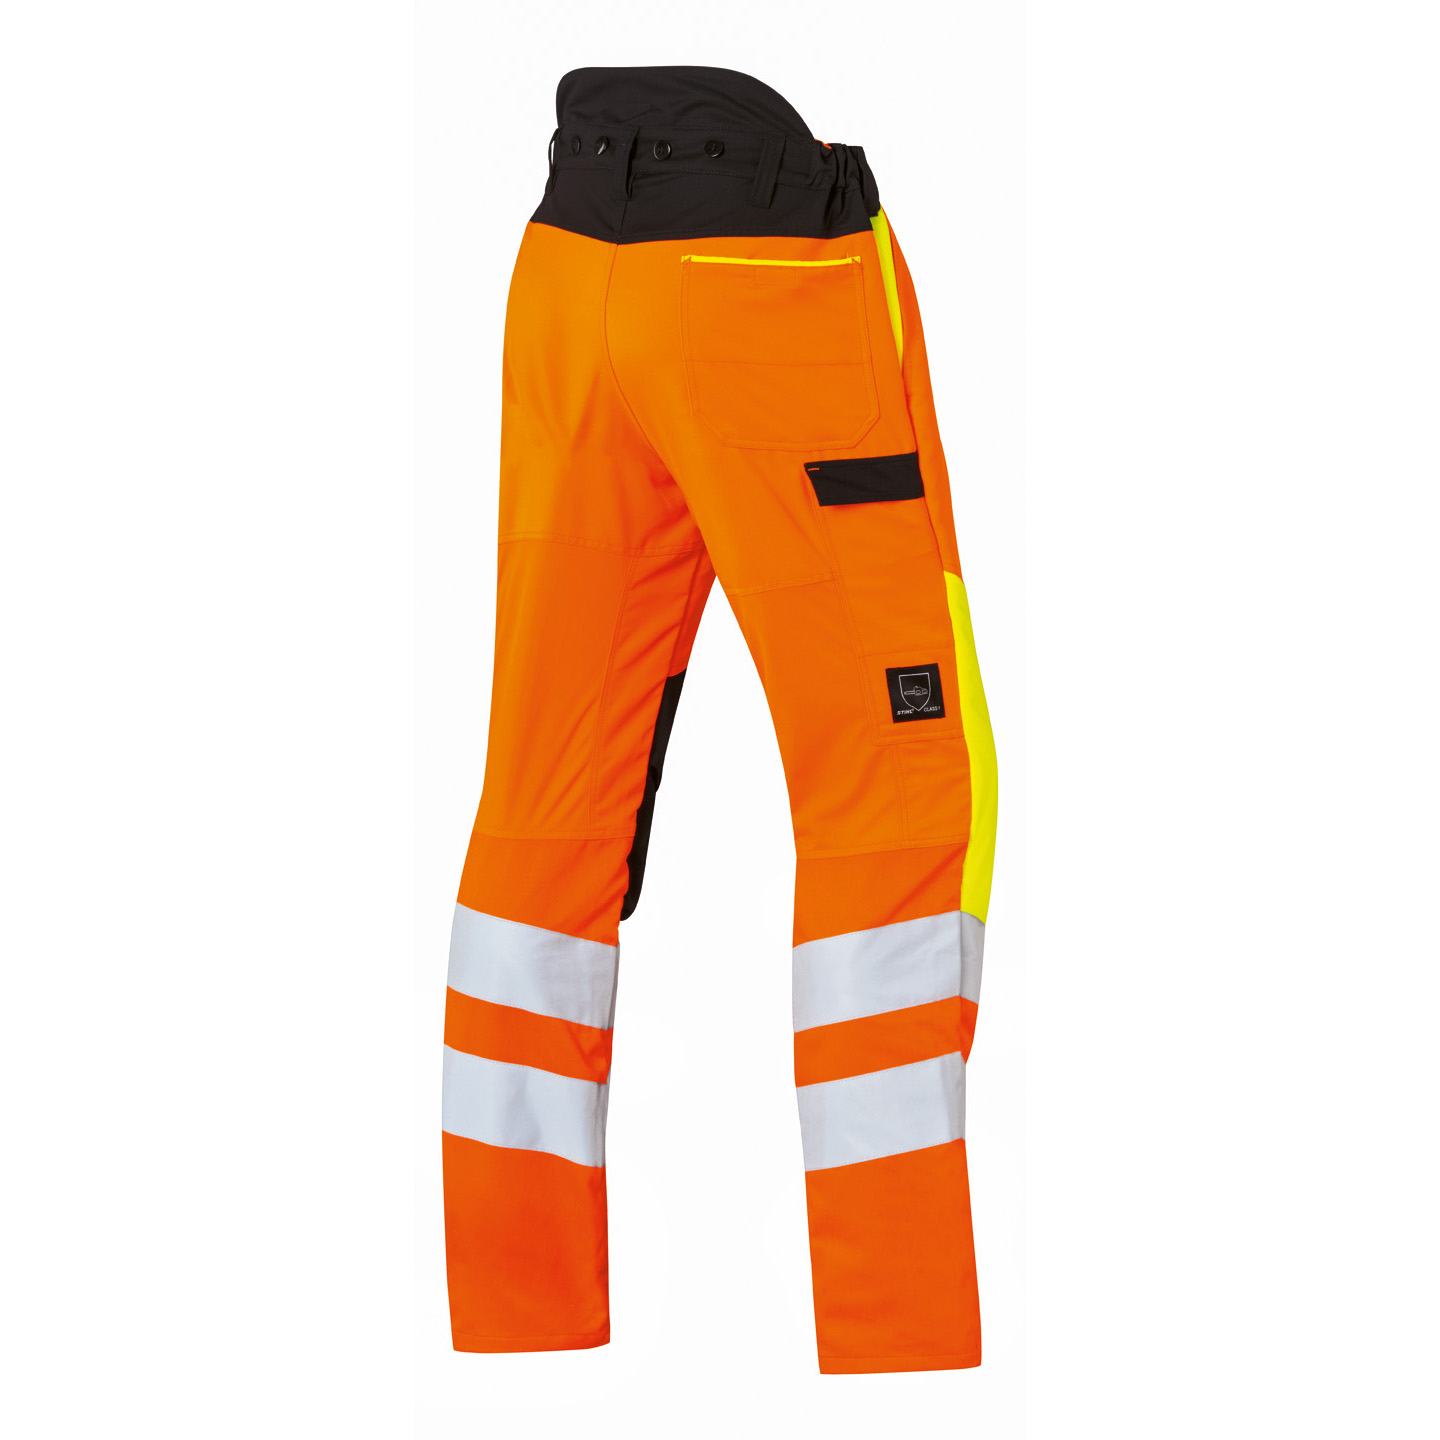 MS PROTECT HiVis